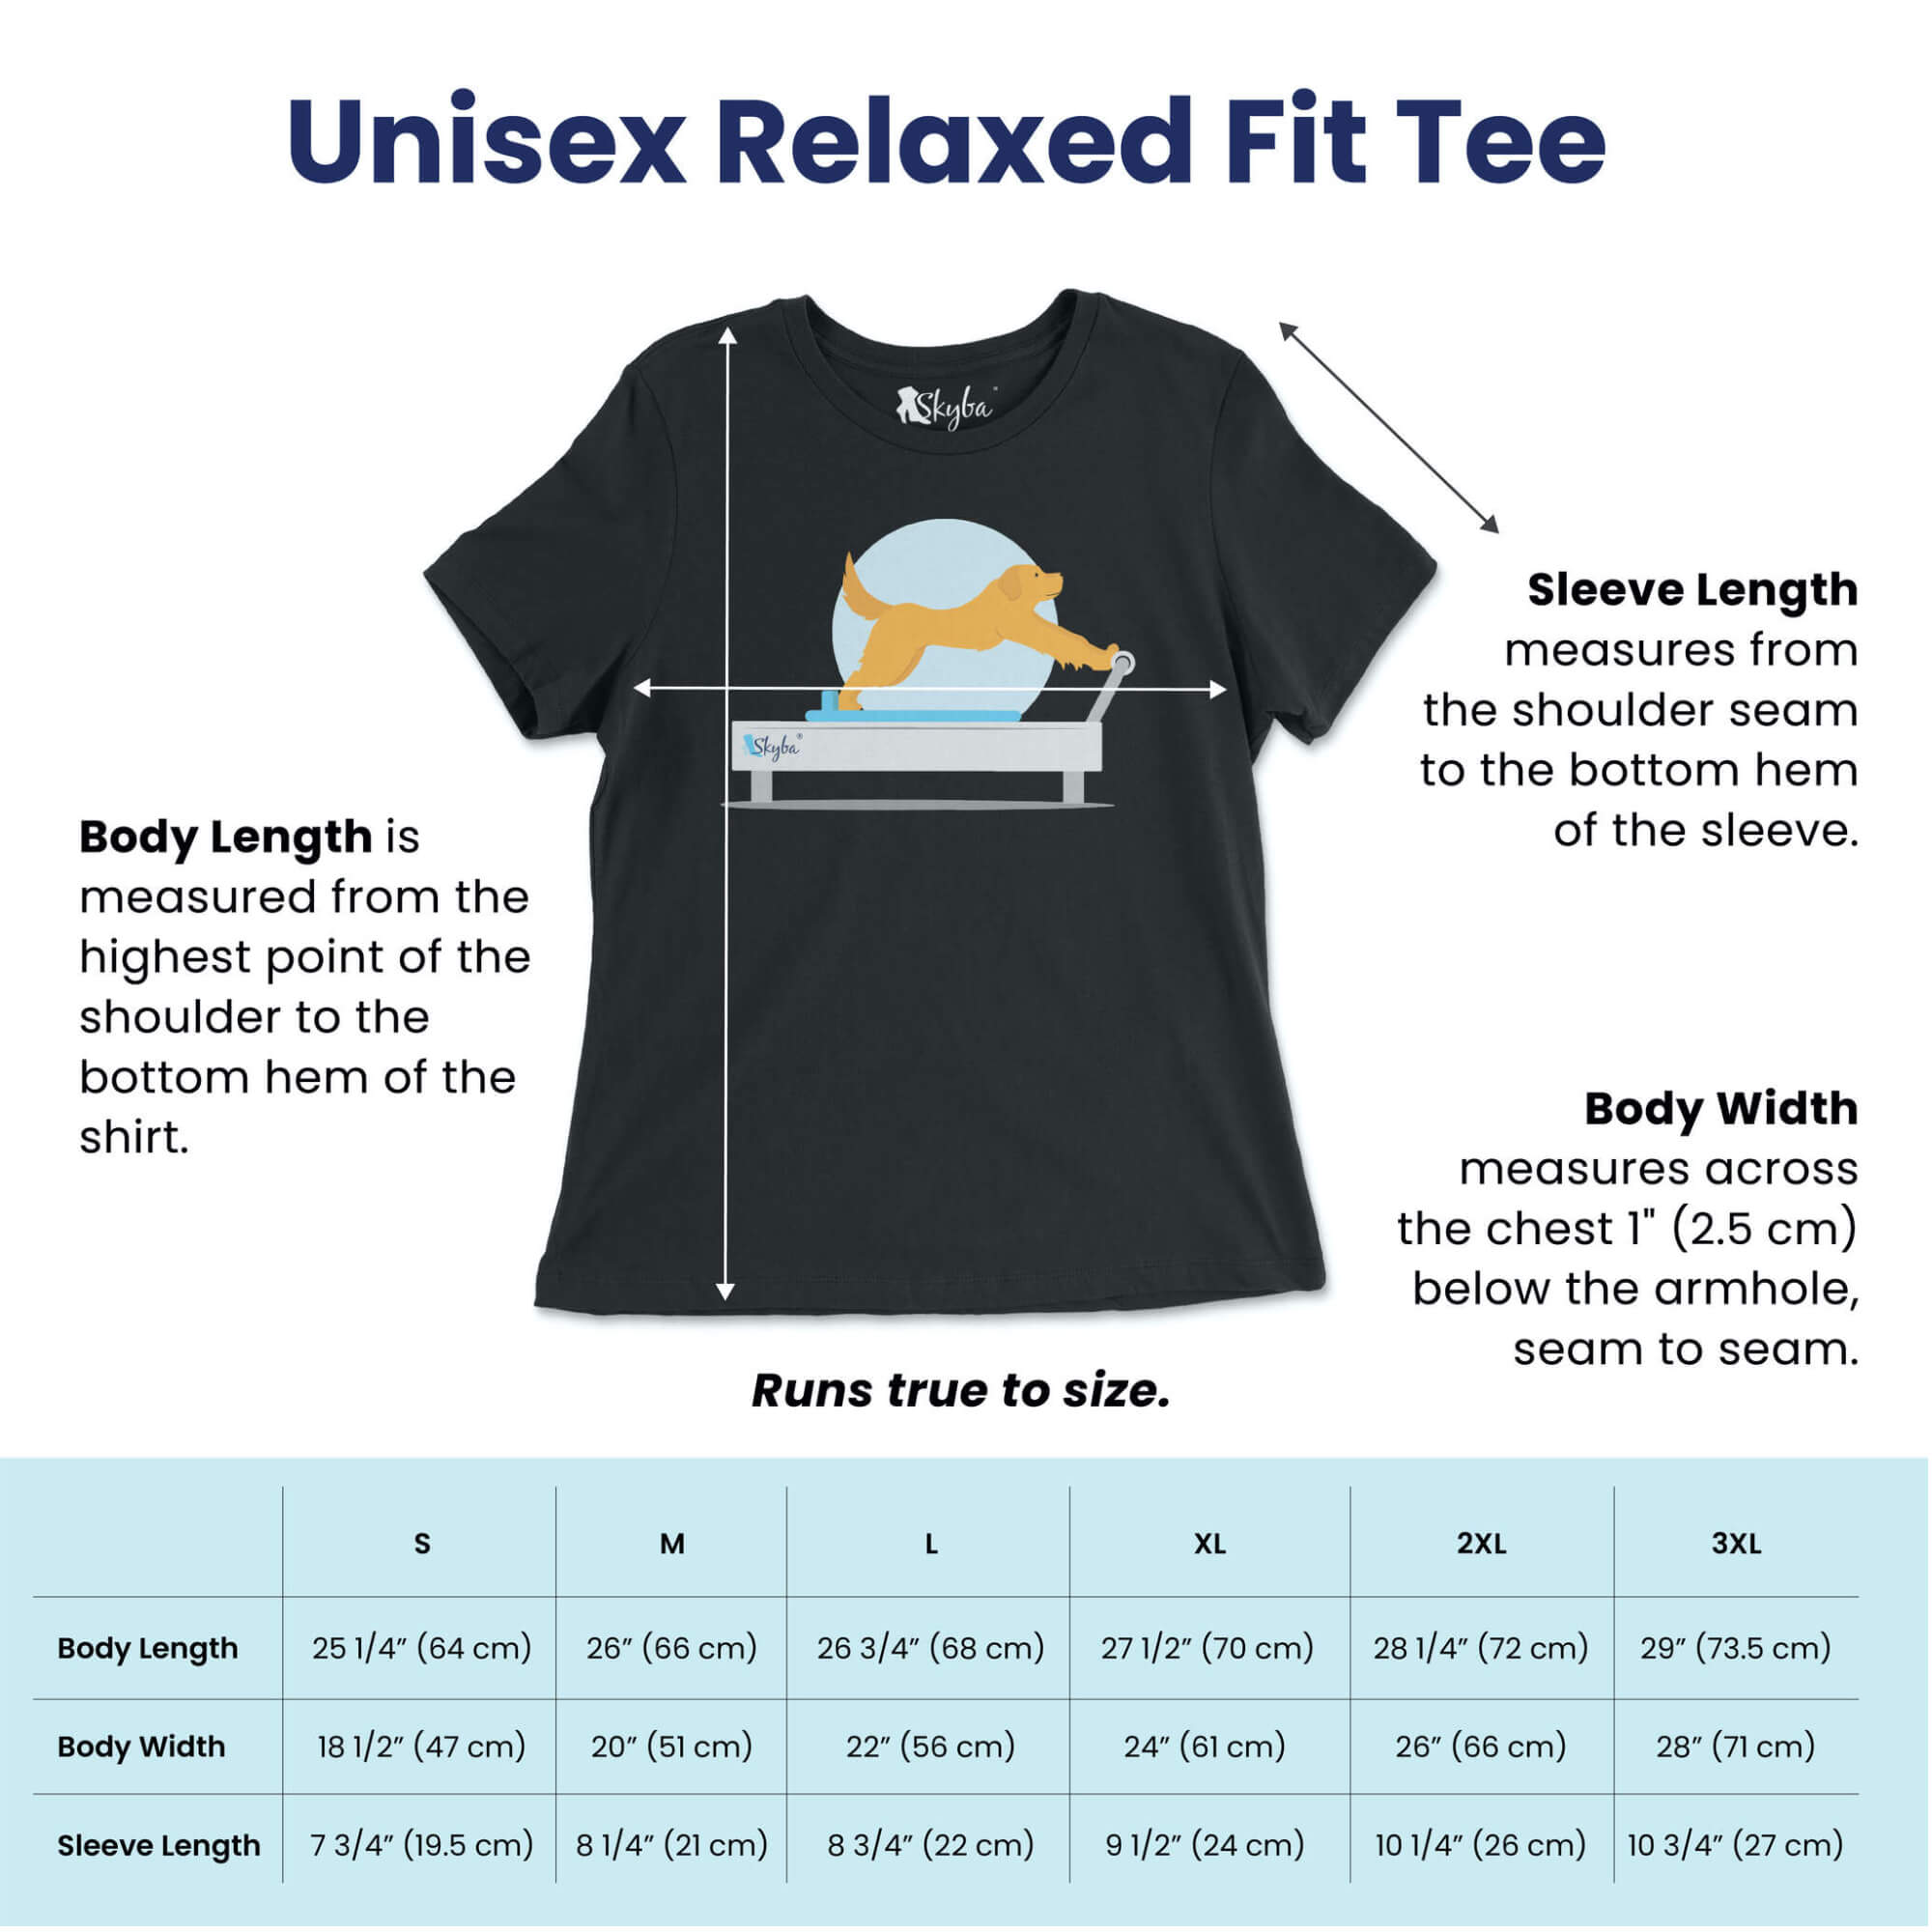 "Happiness is Feet in Straps" Panda on Pilates Reformer - Classic Tee